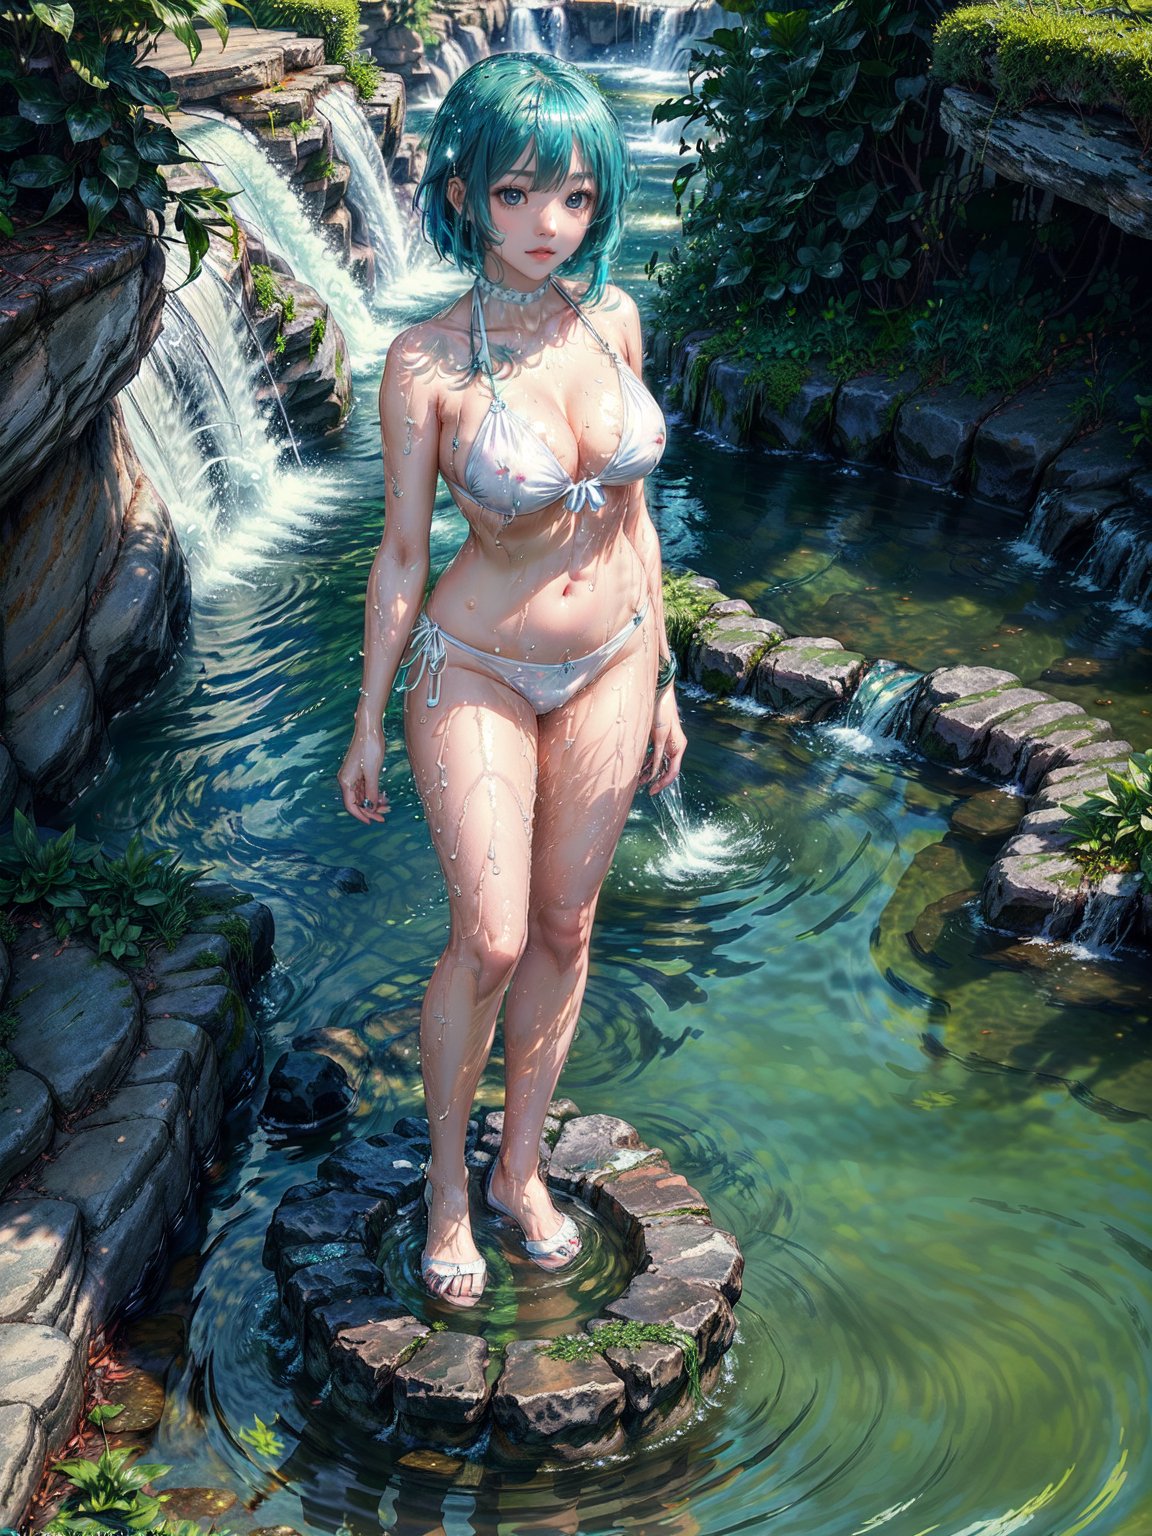 ((full body):2) {((Solo/A woman/standing):1.5)}: ((wearing extremely transparent white silk bikini and tight to her body):1.2), ((extremely large breasts):2 ), ((shimmering blue eyes, hlfcol short hair woman with blue and green)1.2), ((looking at the viewer with a look of love, flashy smile of excitement):1.3), ((striking an erotic pose):1.3), \n ((Water park full of waterfalls, water falling on top of the body):1.2), anime, anime-style, 16k, ((best quality, high details):1.4), masterpiece, UHD,(hlfcol haired girl with color1 and col)